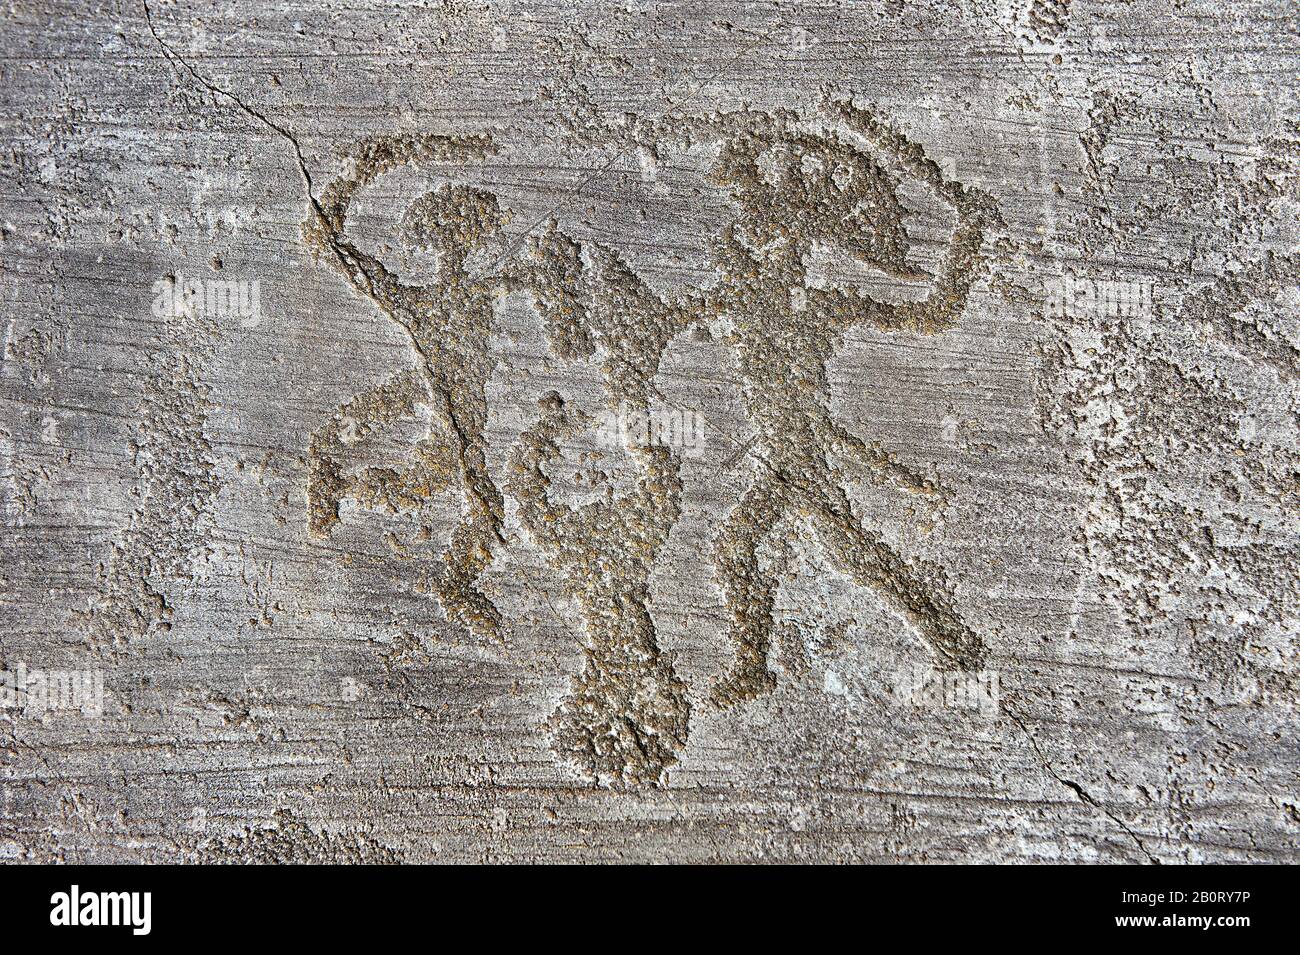 Petroglyph, rock carving, of two warriors fighting, the one on the right has a headress and they both have shields. Foppi di Nadro, Riserva Naturale Stock Photo